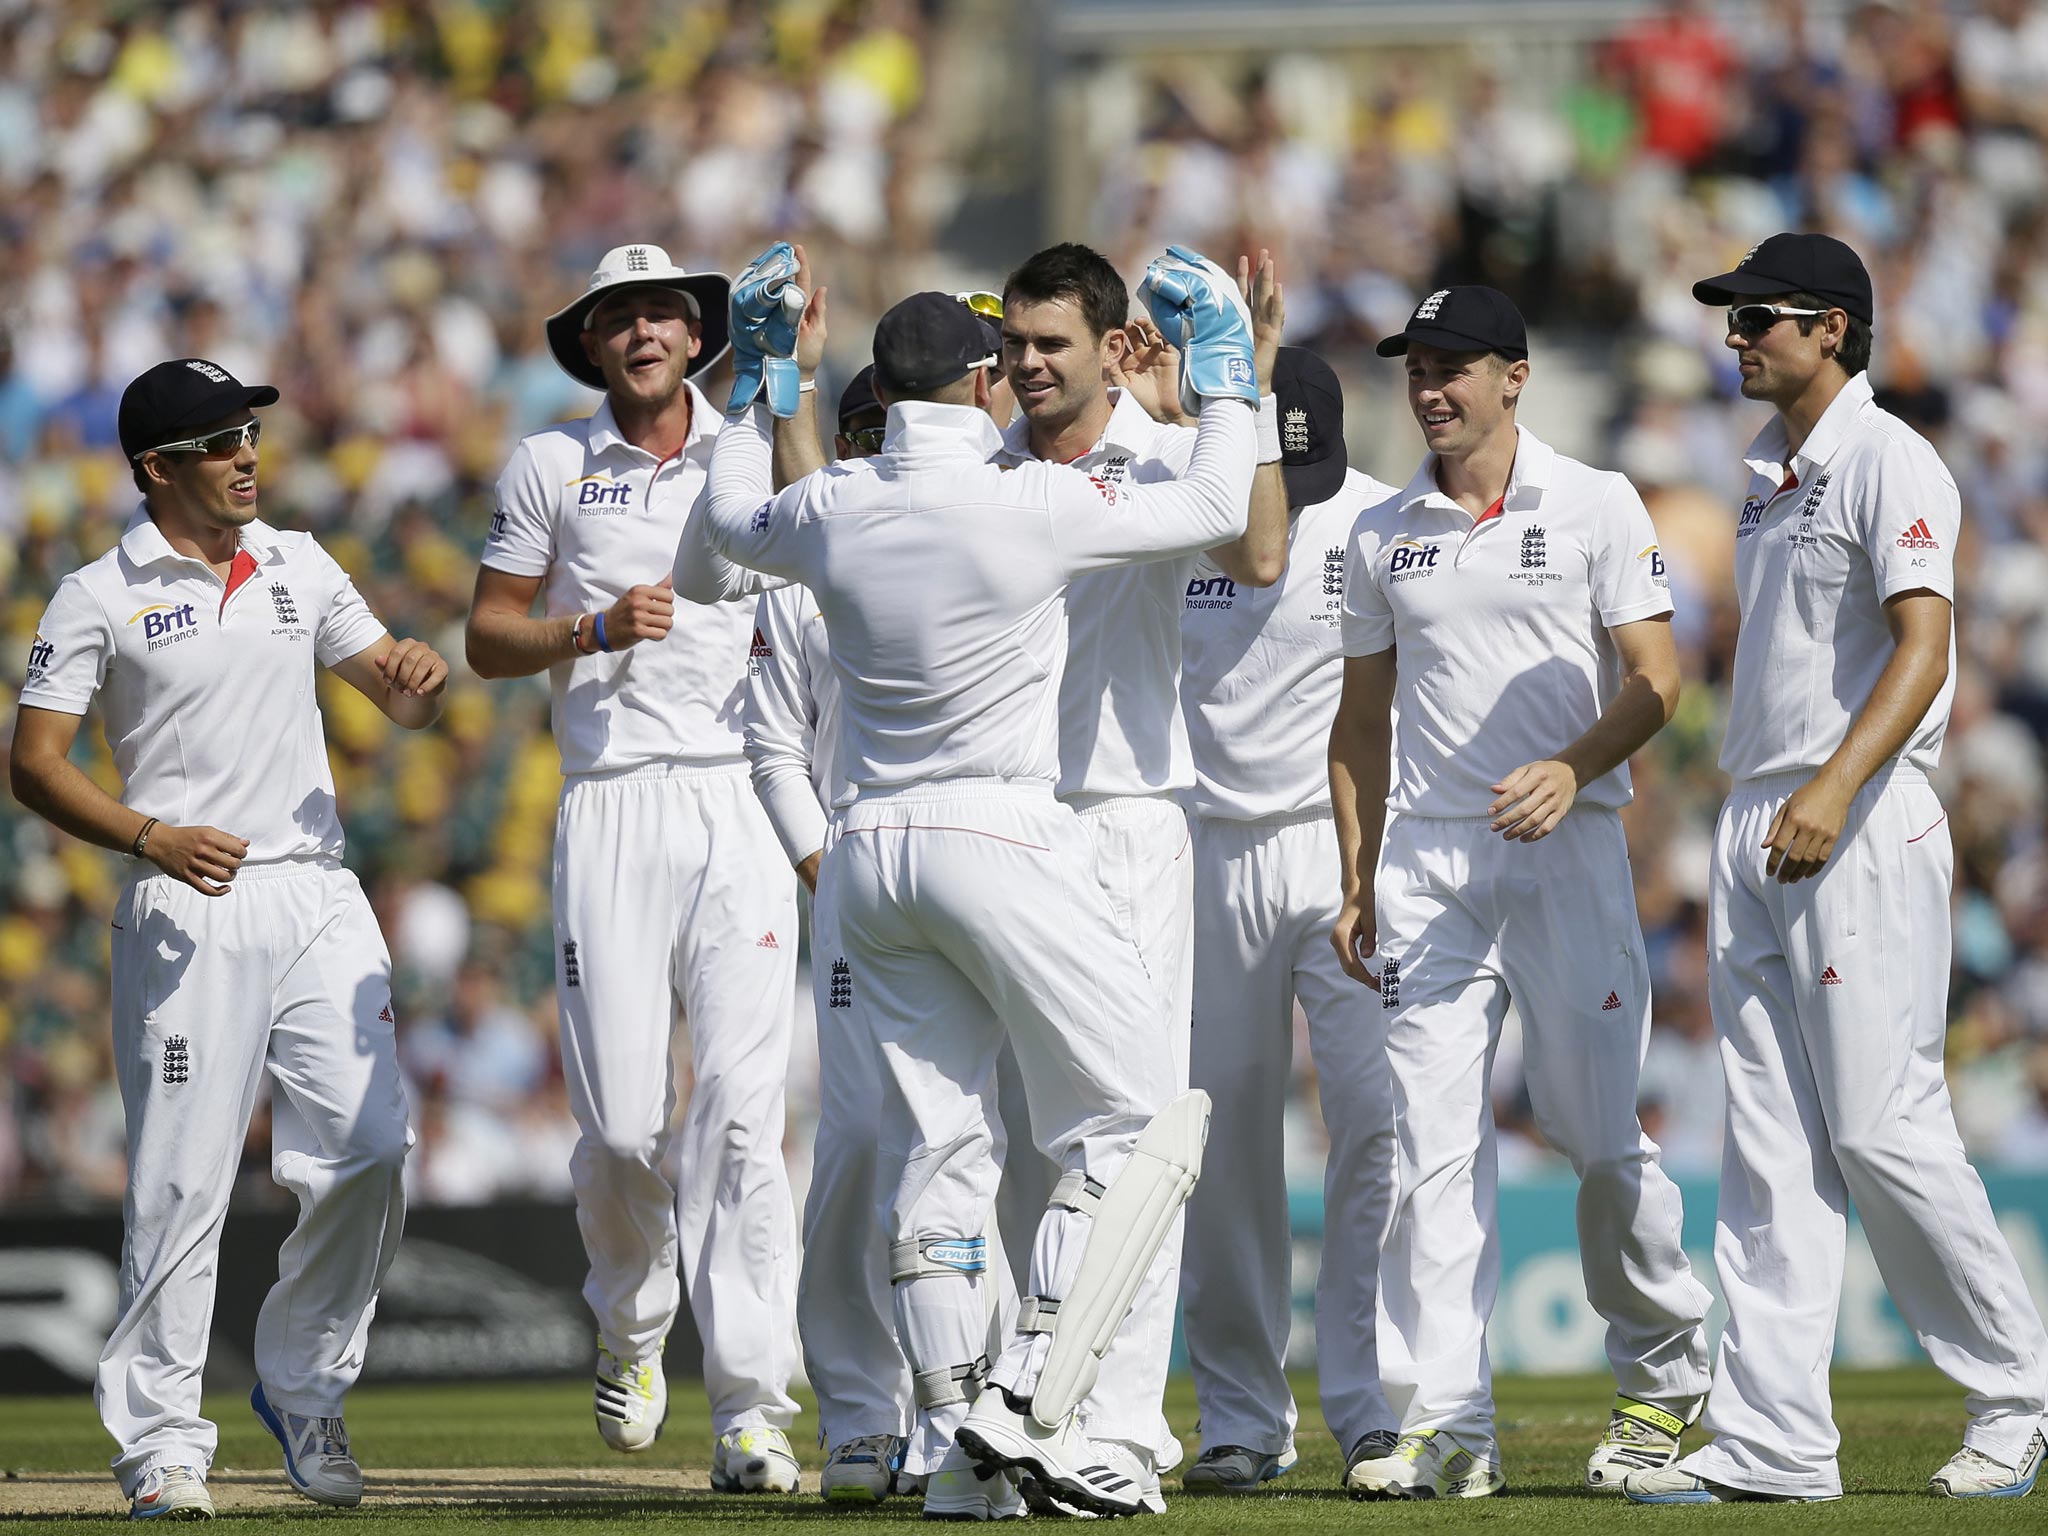 21 August 2013: England's James Anderson (centre) celebrates with teammates after taking the wicket of Australia's David Warner during play on the first day of the fifth Ashes cricket Test at the Oval cricket ground in London